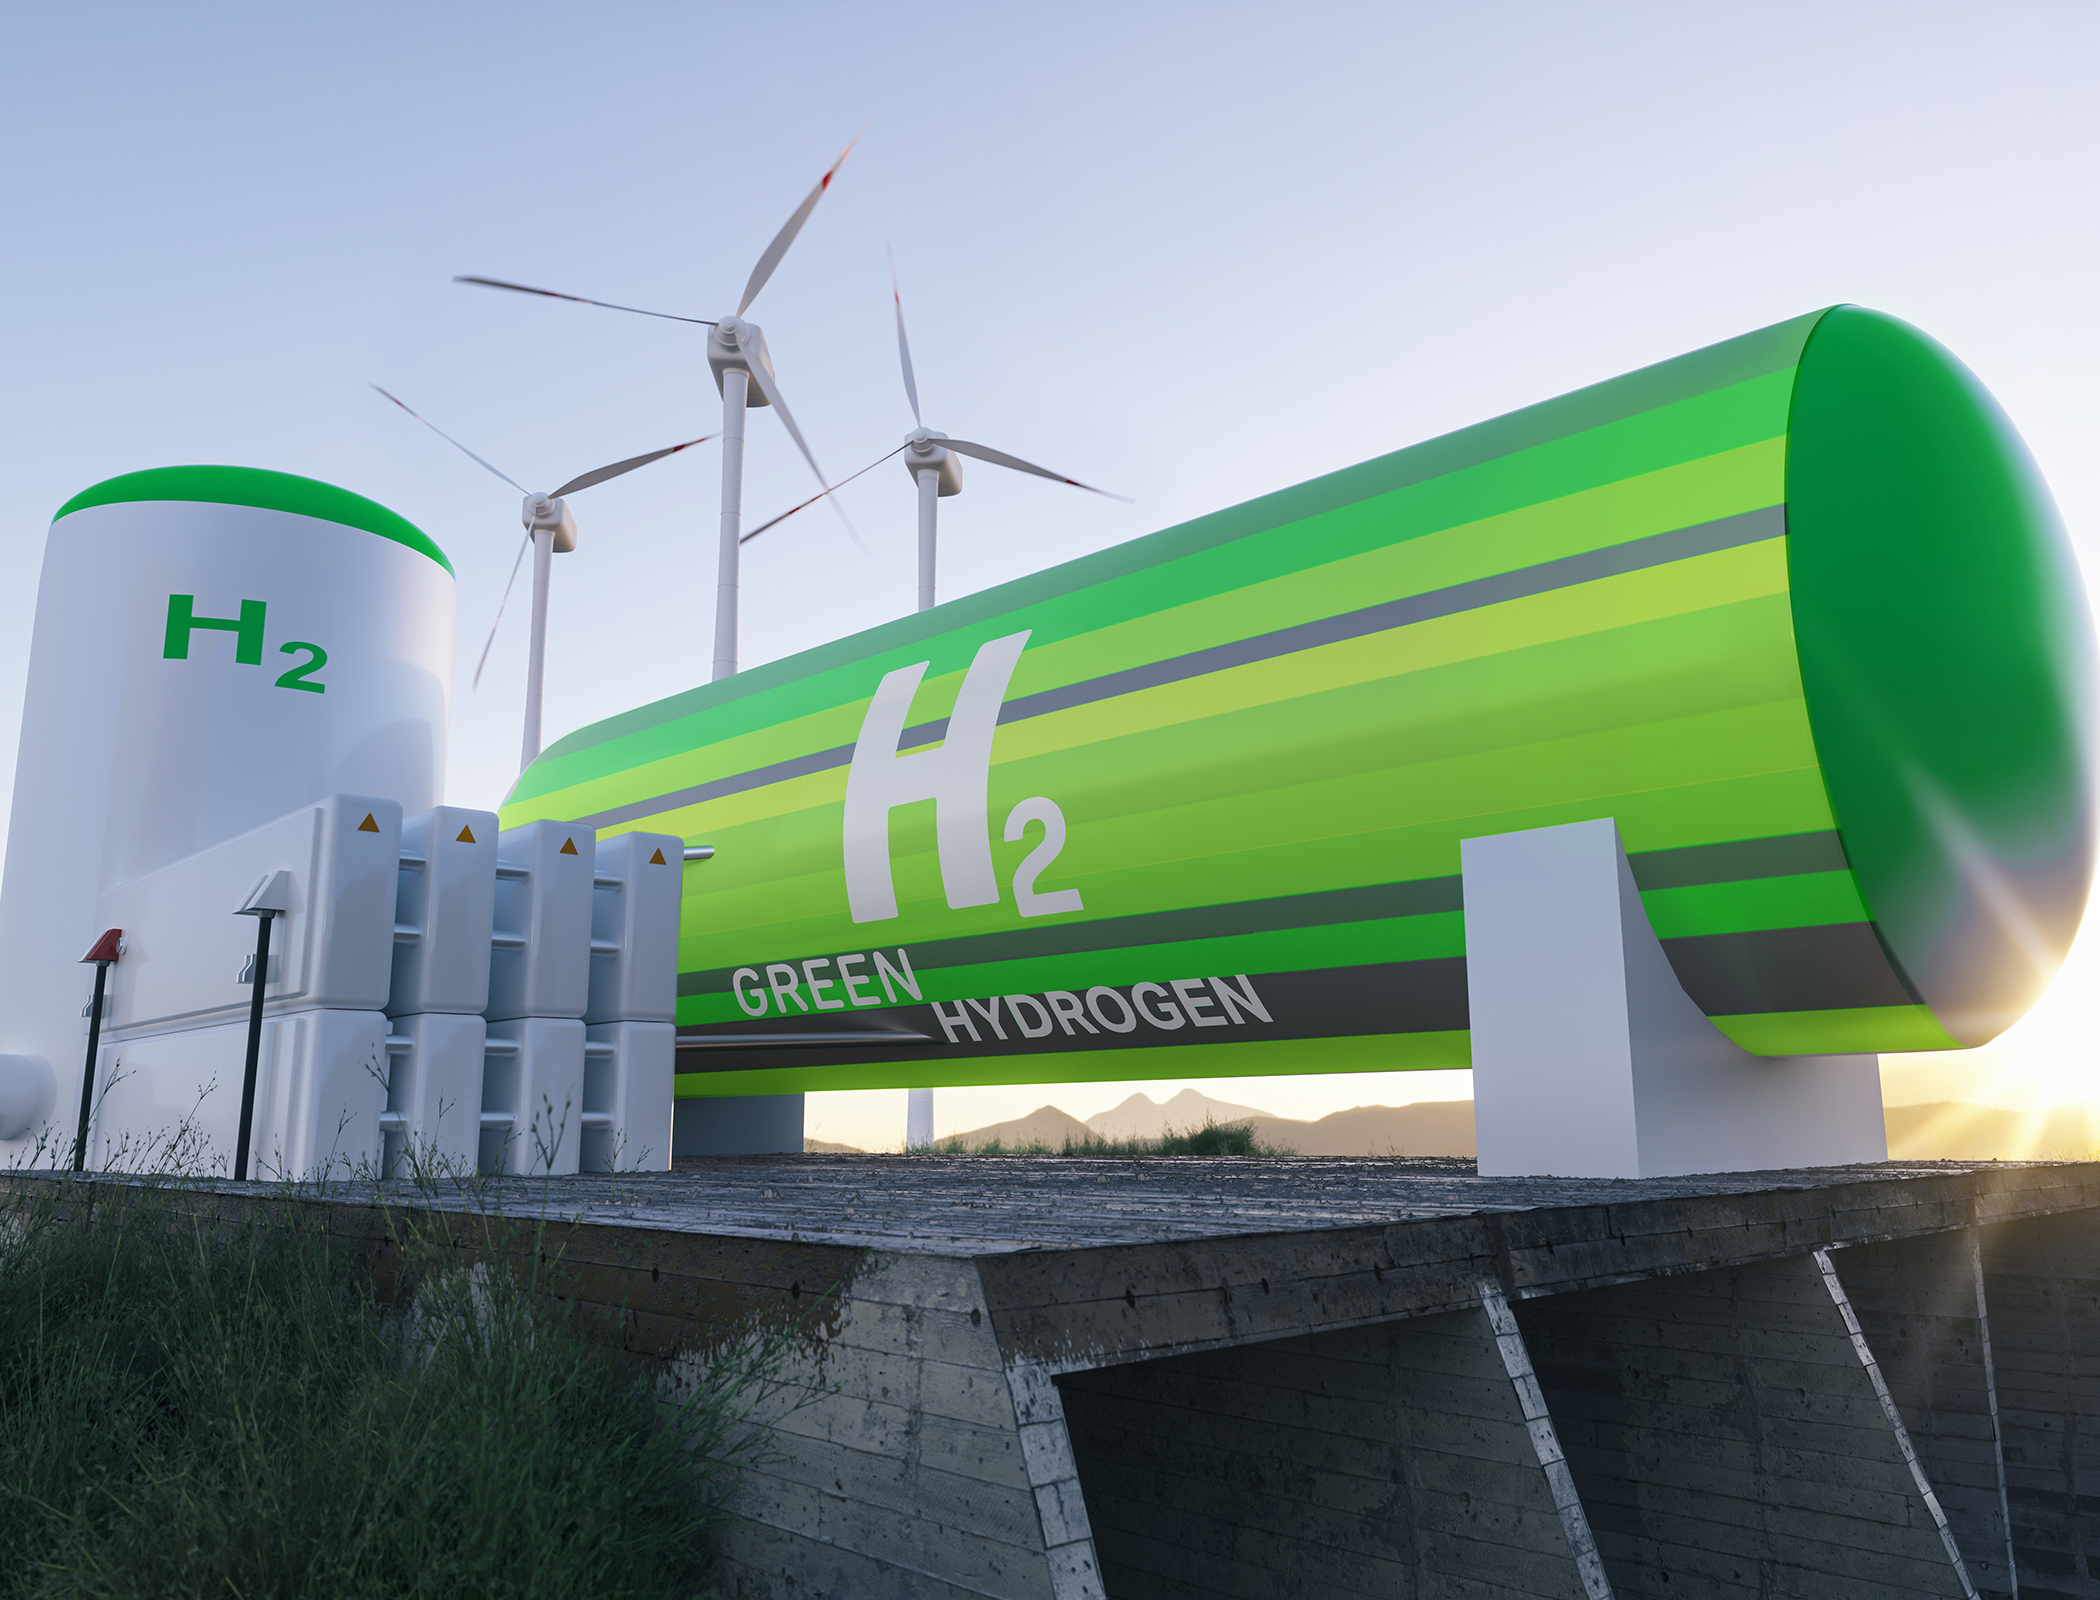 Cheaper green hydrogen production made possible with ‘thermochemical’ method